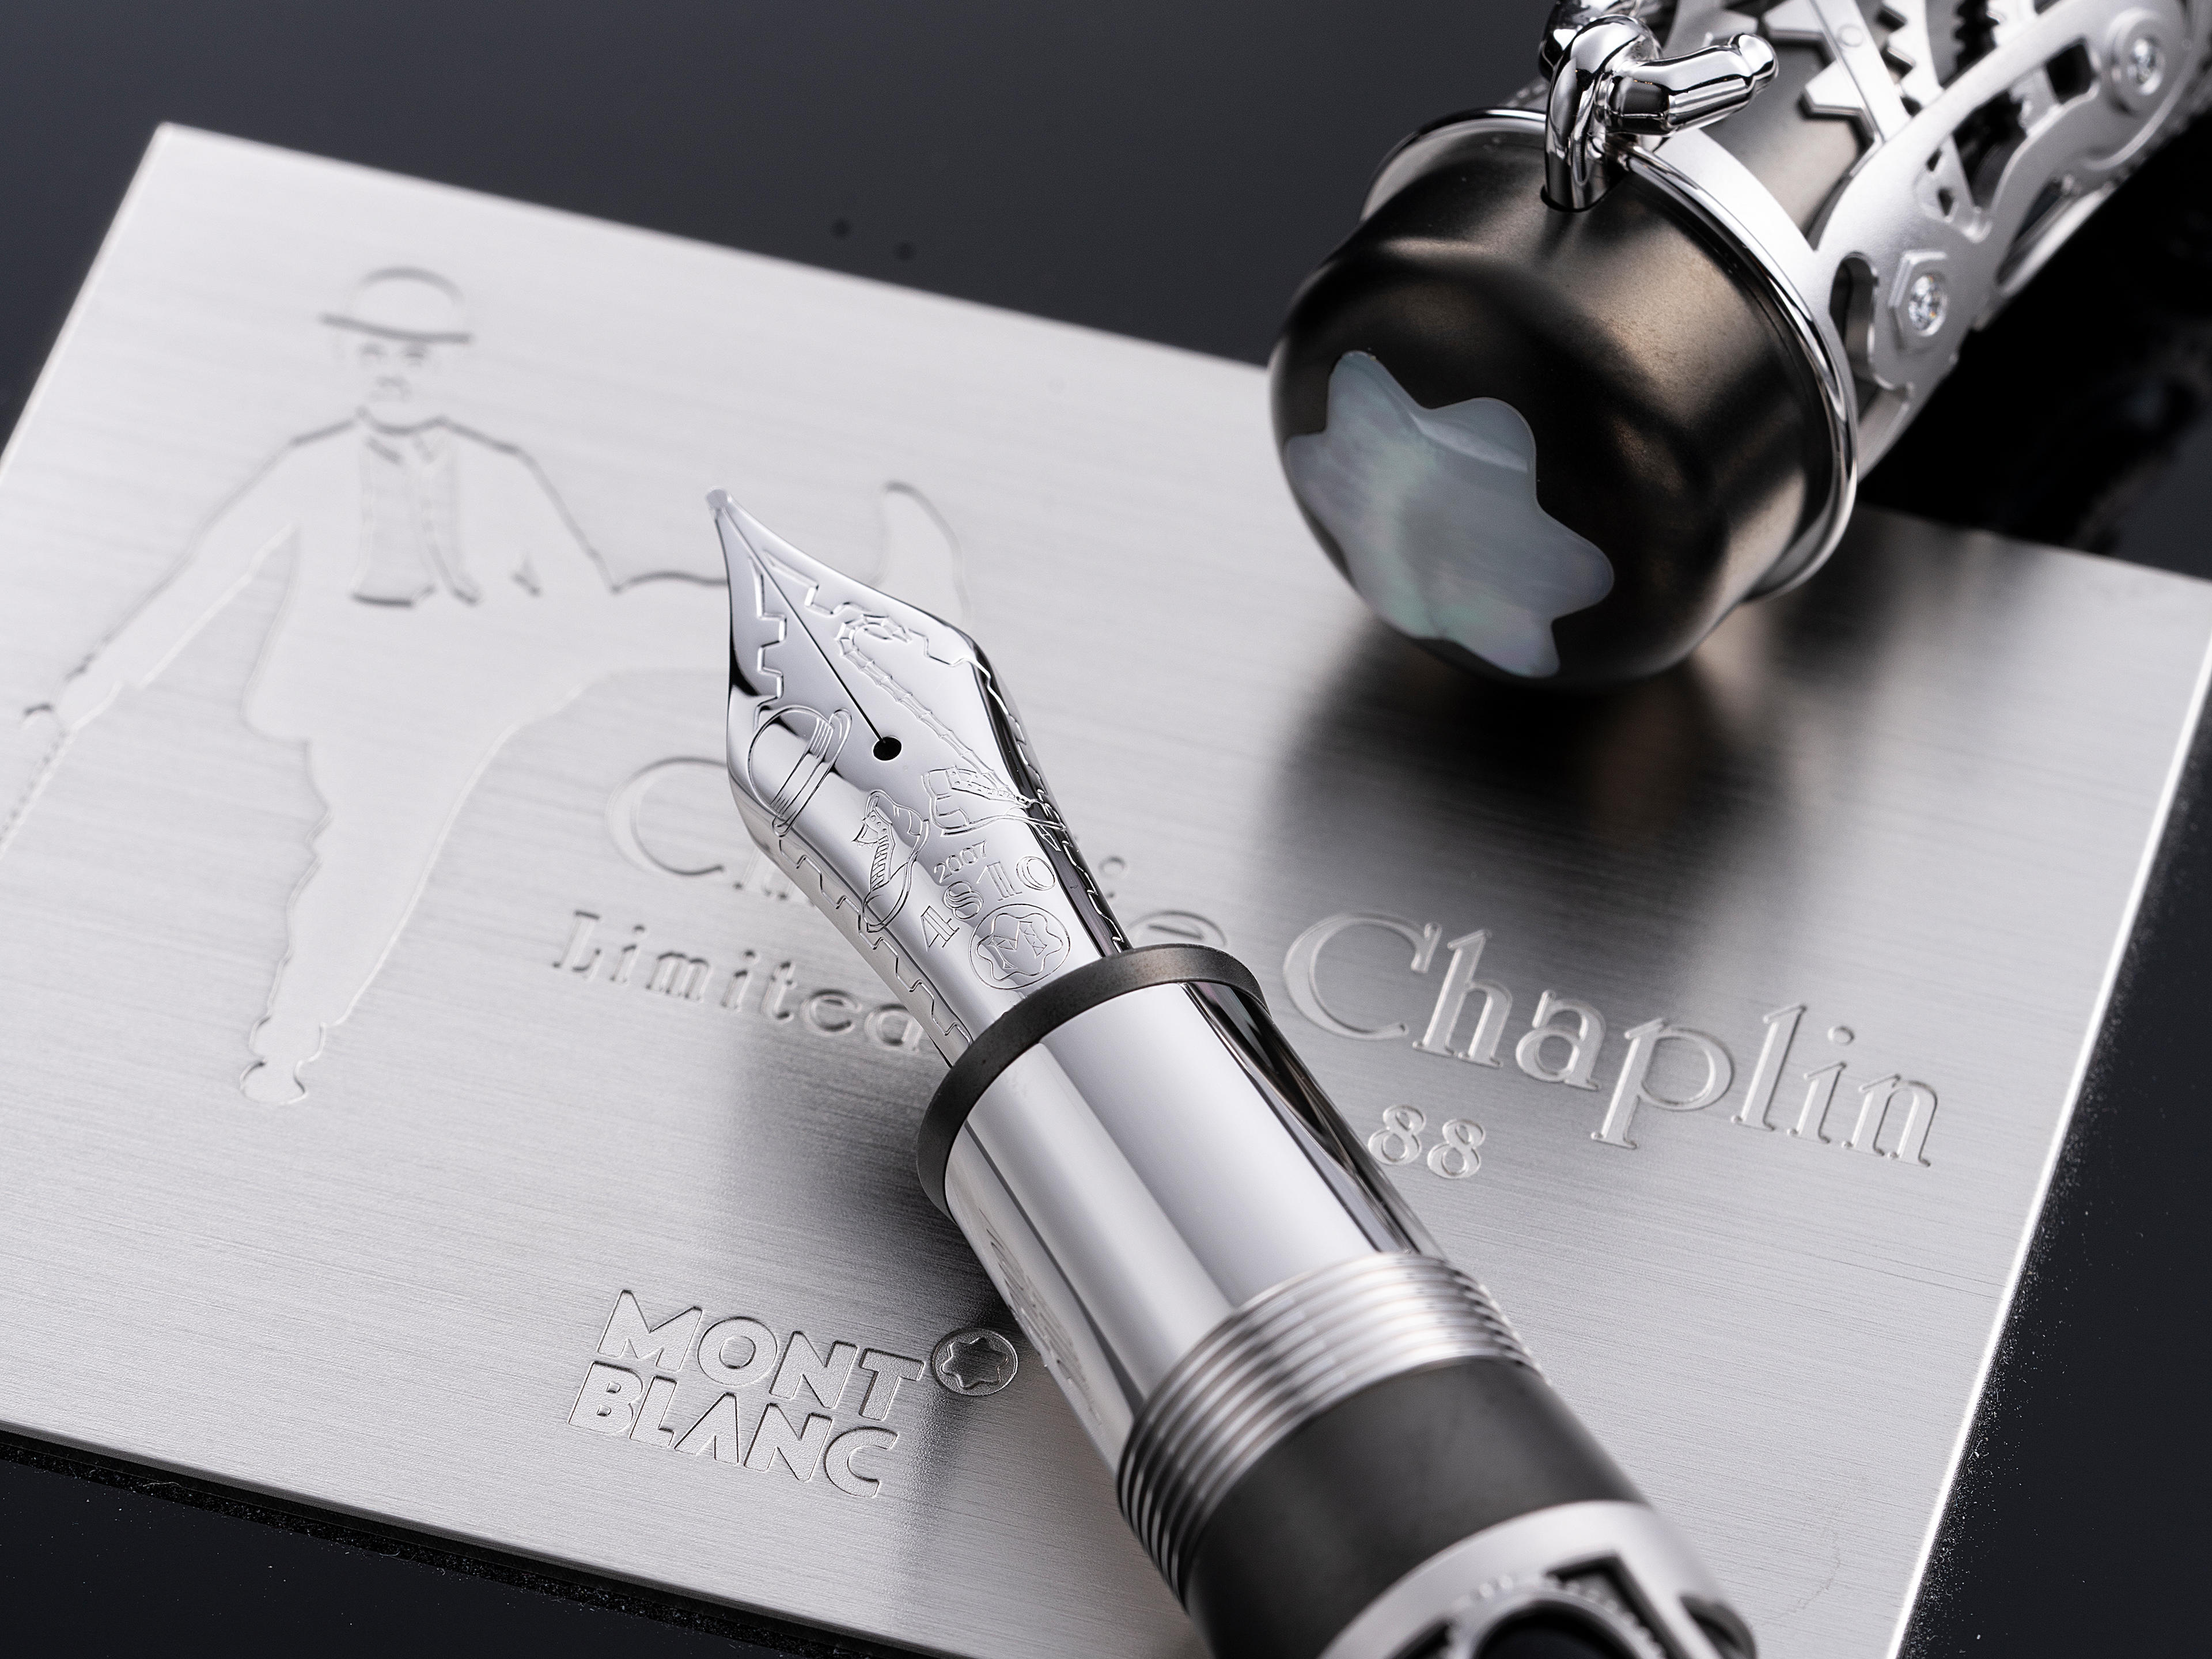 MONTBLANC | CHARLIE CHAPLIN, REF. 28717, AN EXTREMELY RARE, BRAND NEW ARTISAN LIMITED EDITION 18K WHITE GOLD, TITANIUM, DIAMOND AND BLACK LACQUER FOUNTAIN PEN